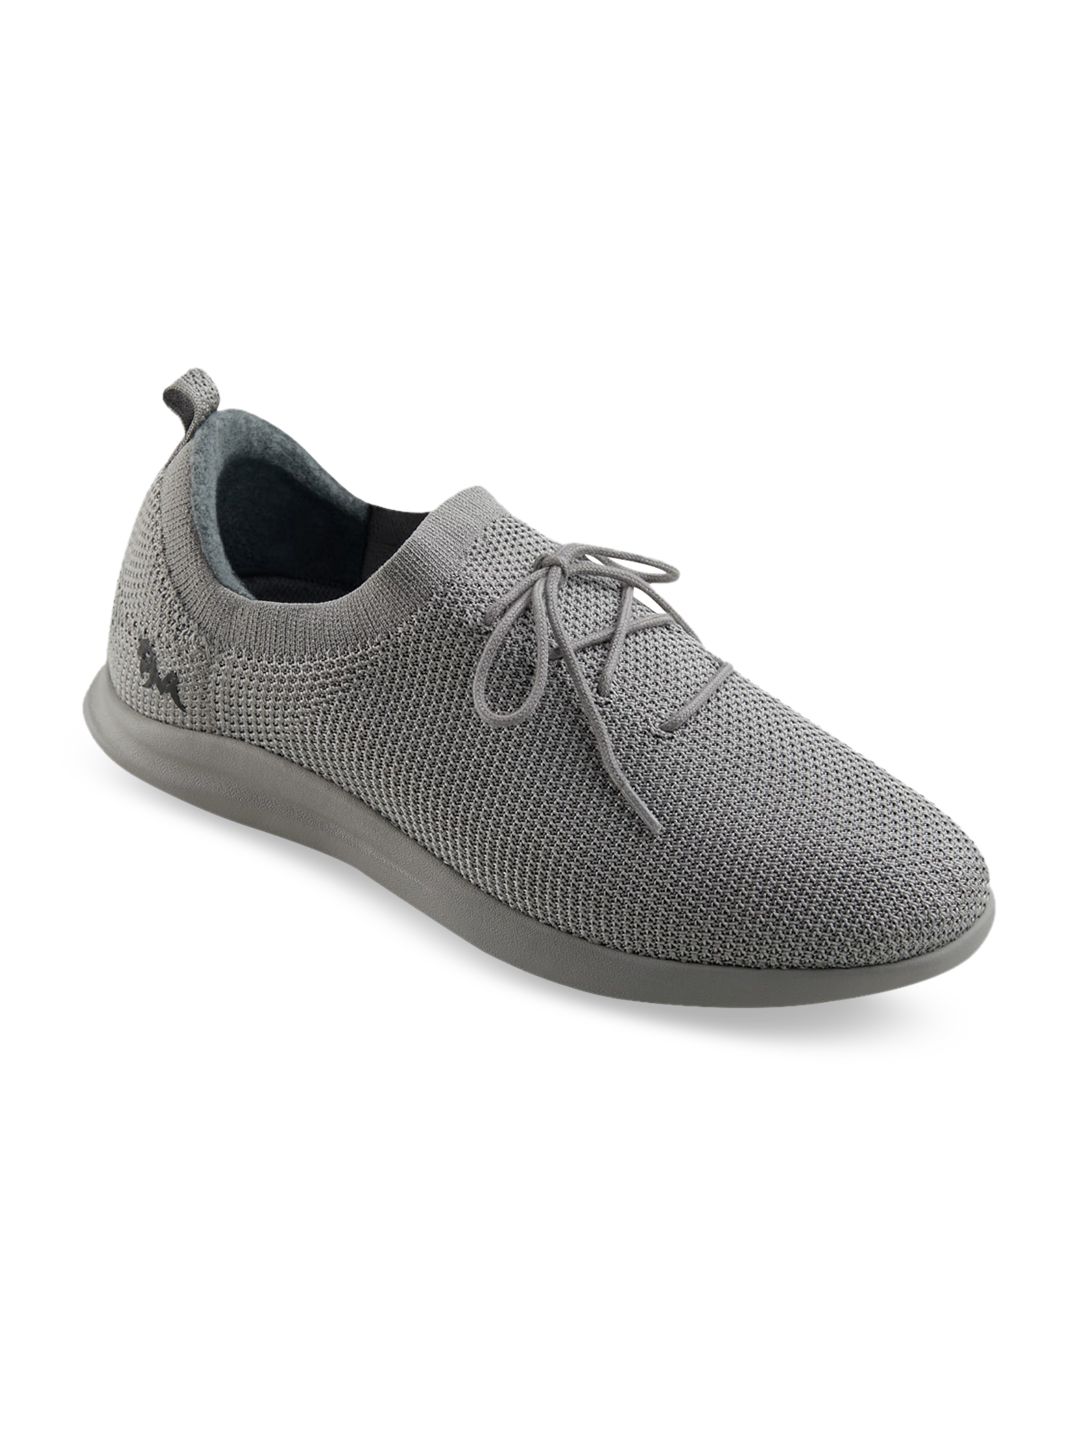 NEEMANS Unisex Grey Re-Live Knit Sneakers Price in India